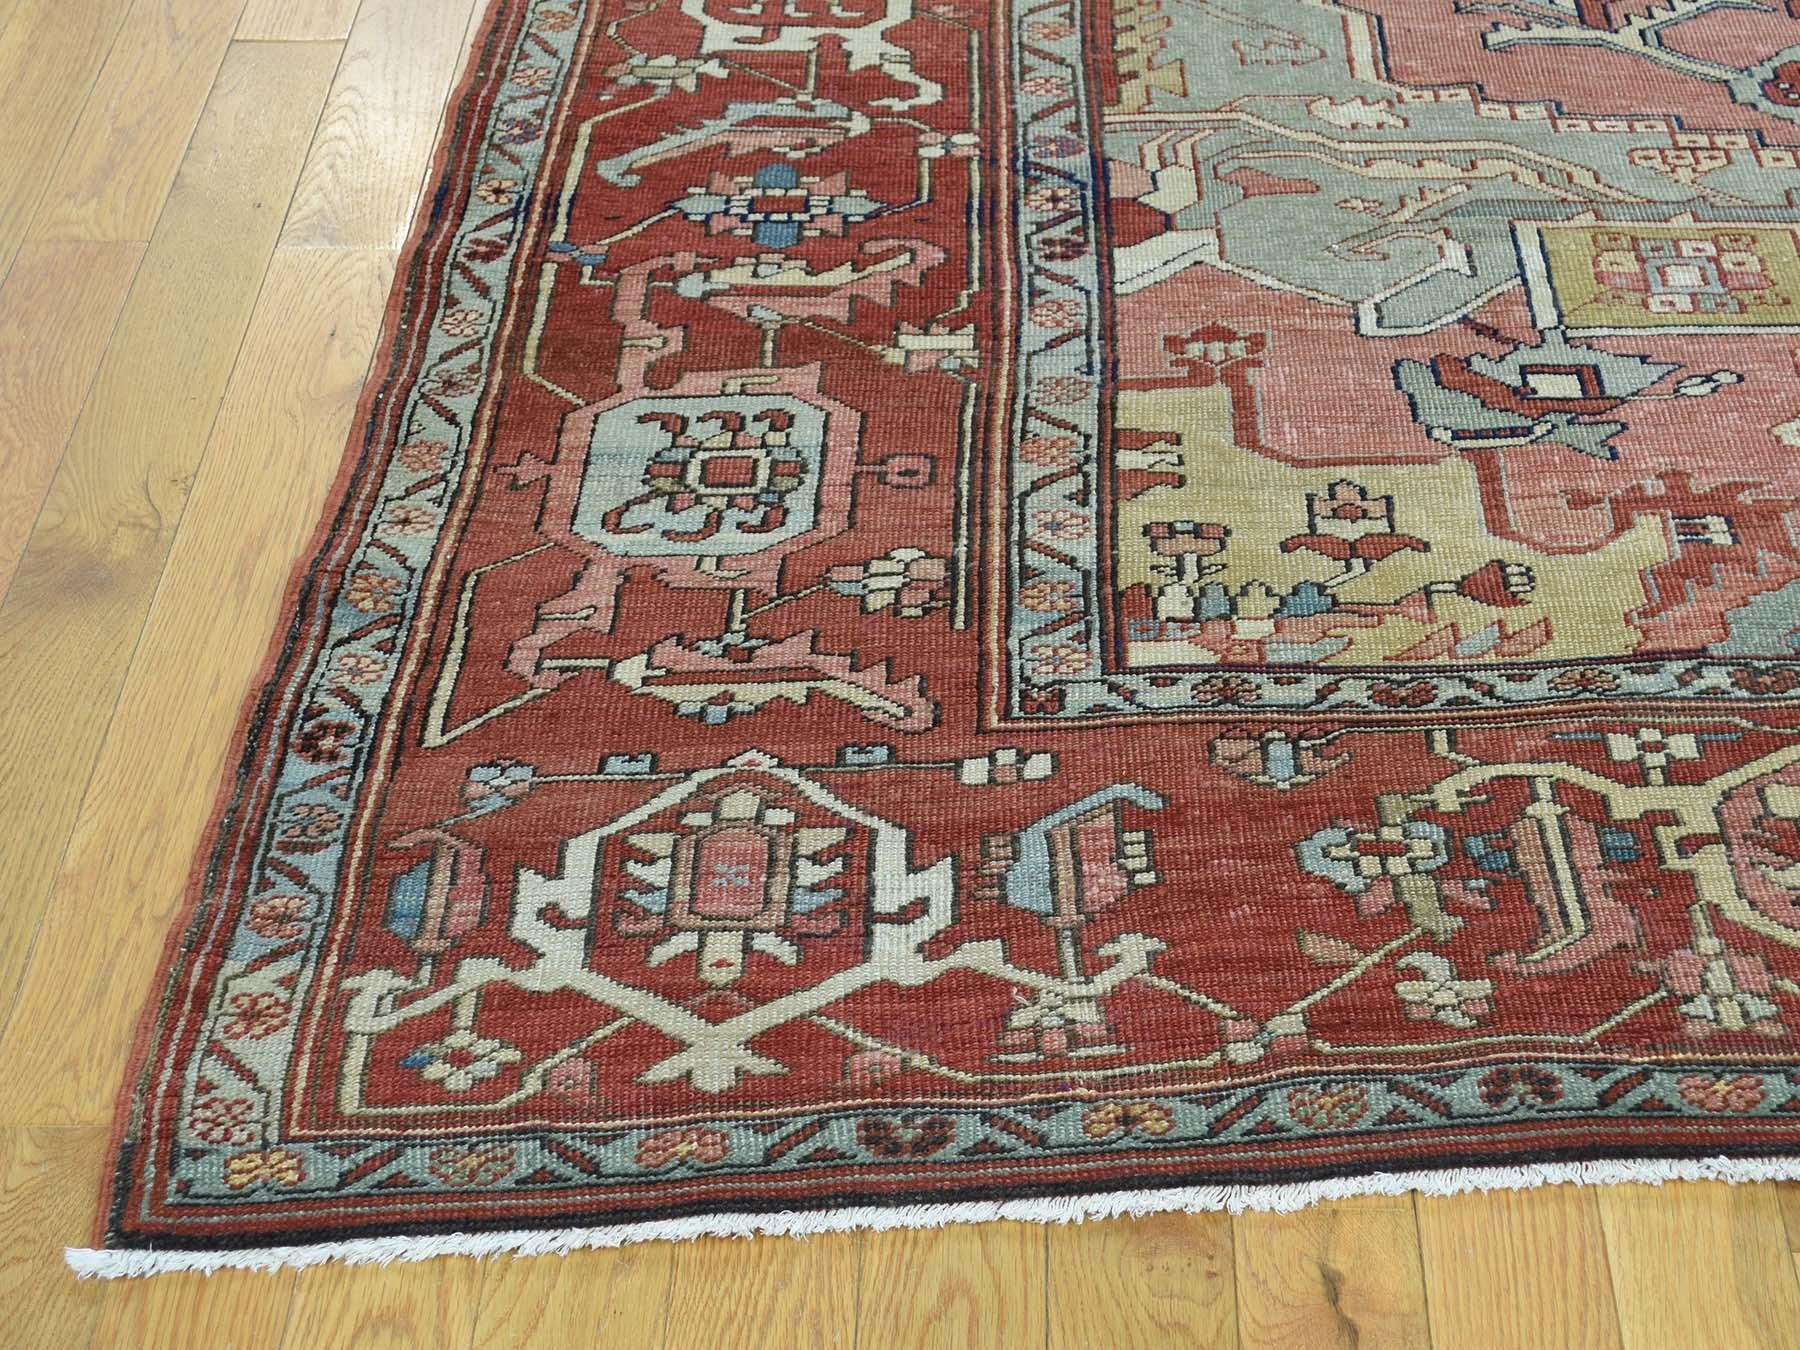 Late 19th Century Rose/Green/Red 1880 Antique Persian Serapi Rug